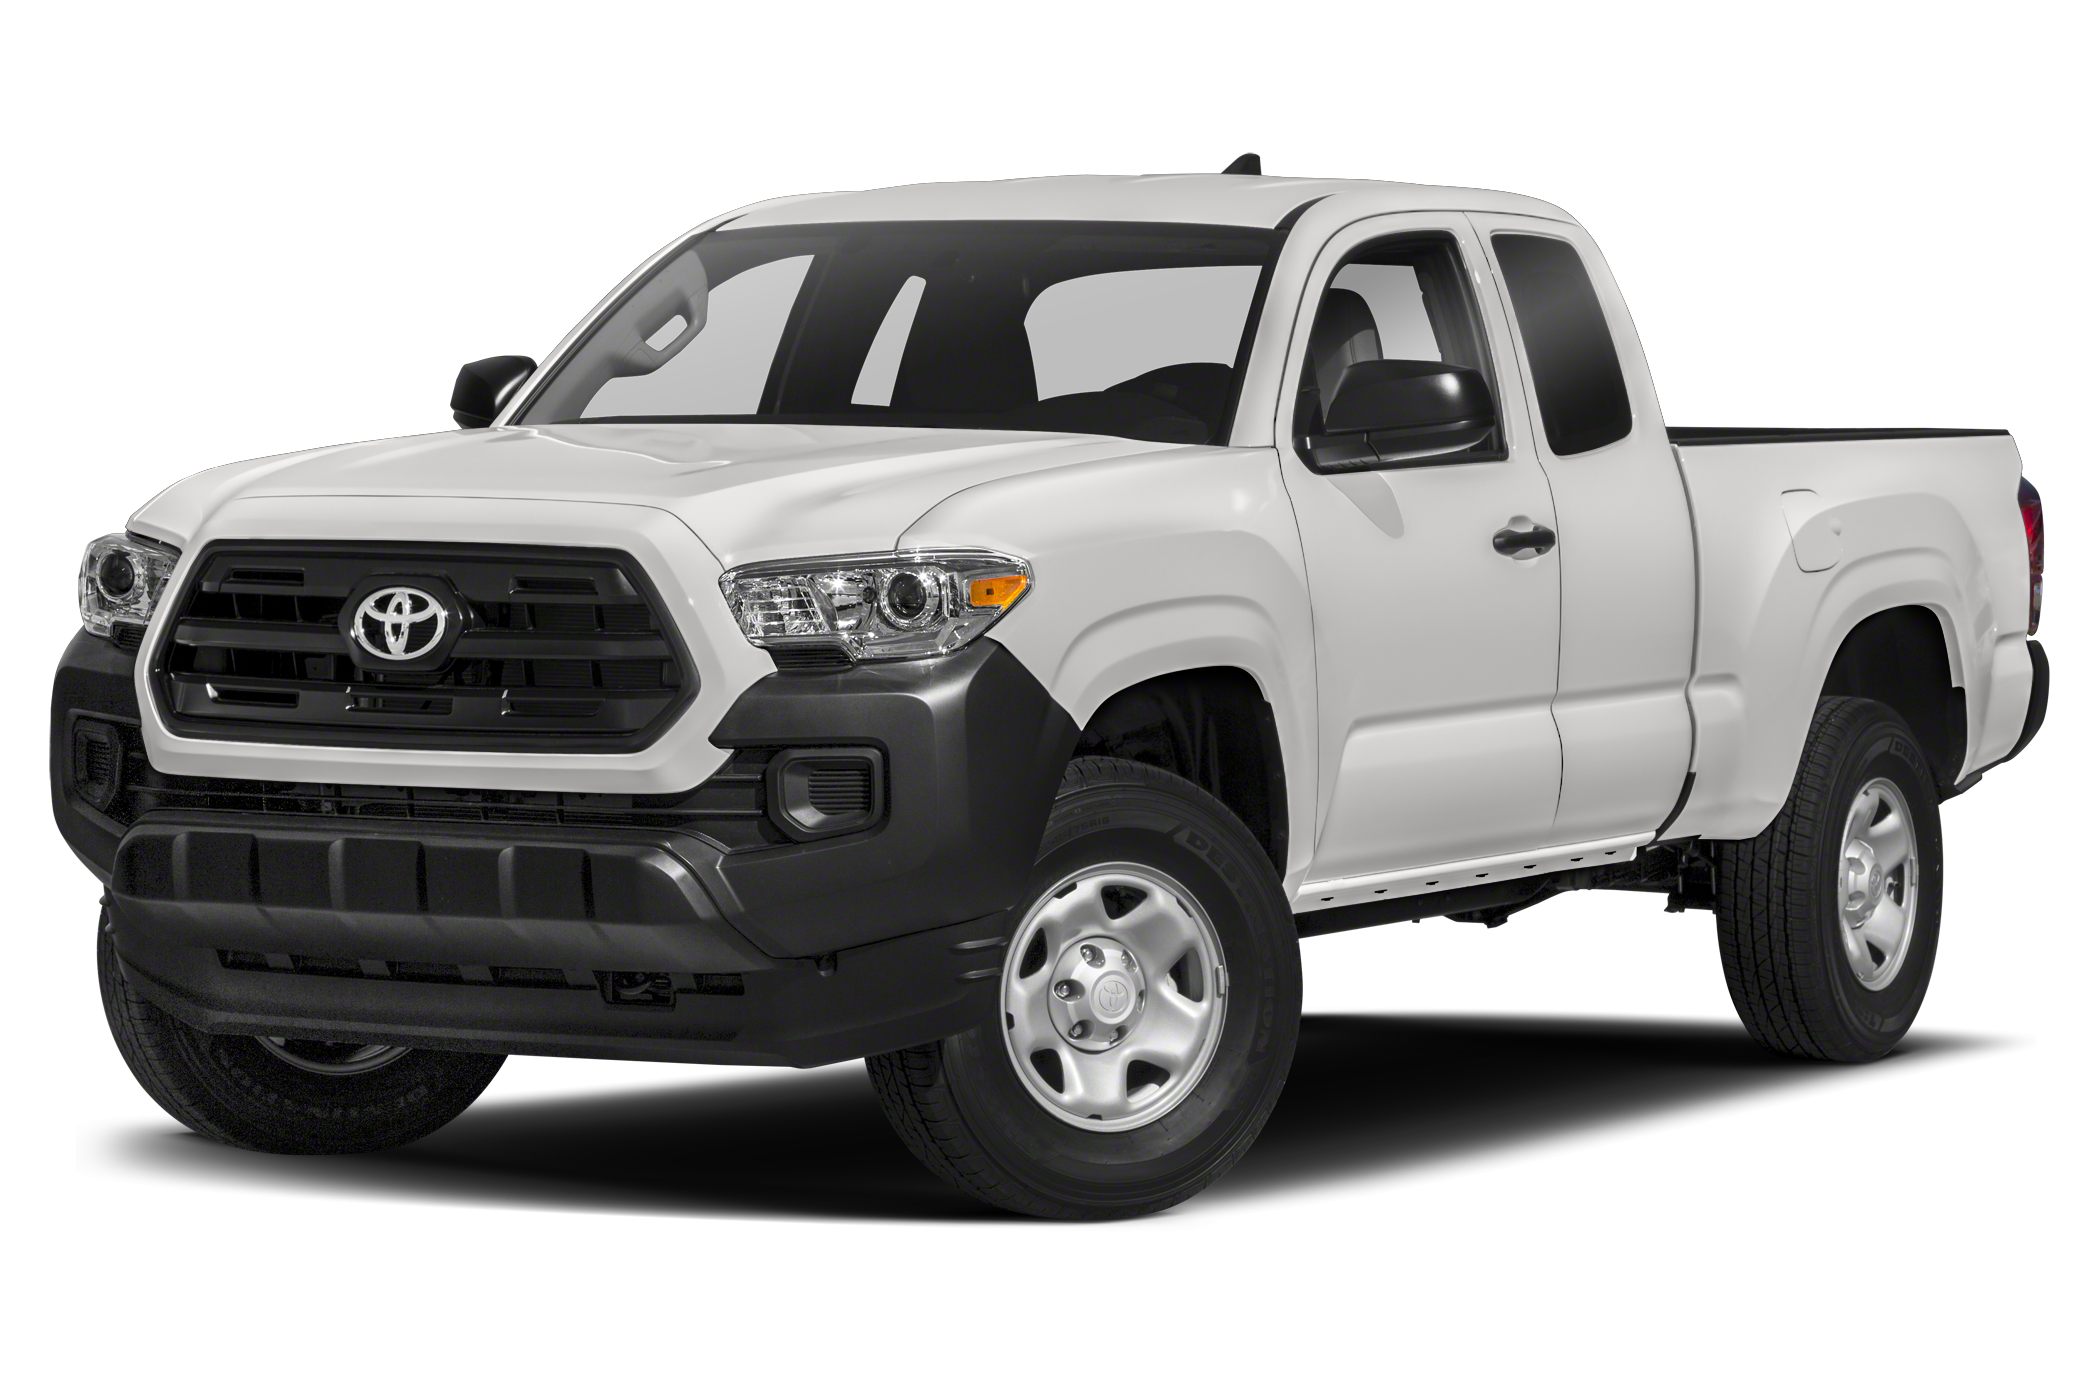 2017 toyota tacoma sr 4x2 access cab 127 4 in wb pricing and options http mcrouter digimarc com imagebridge router mcrouter asp p source 101 p id 332763 p typ 4 p did 0 p cpy 2018 p att 5